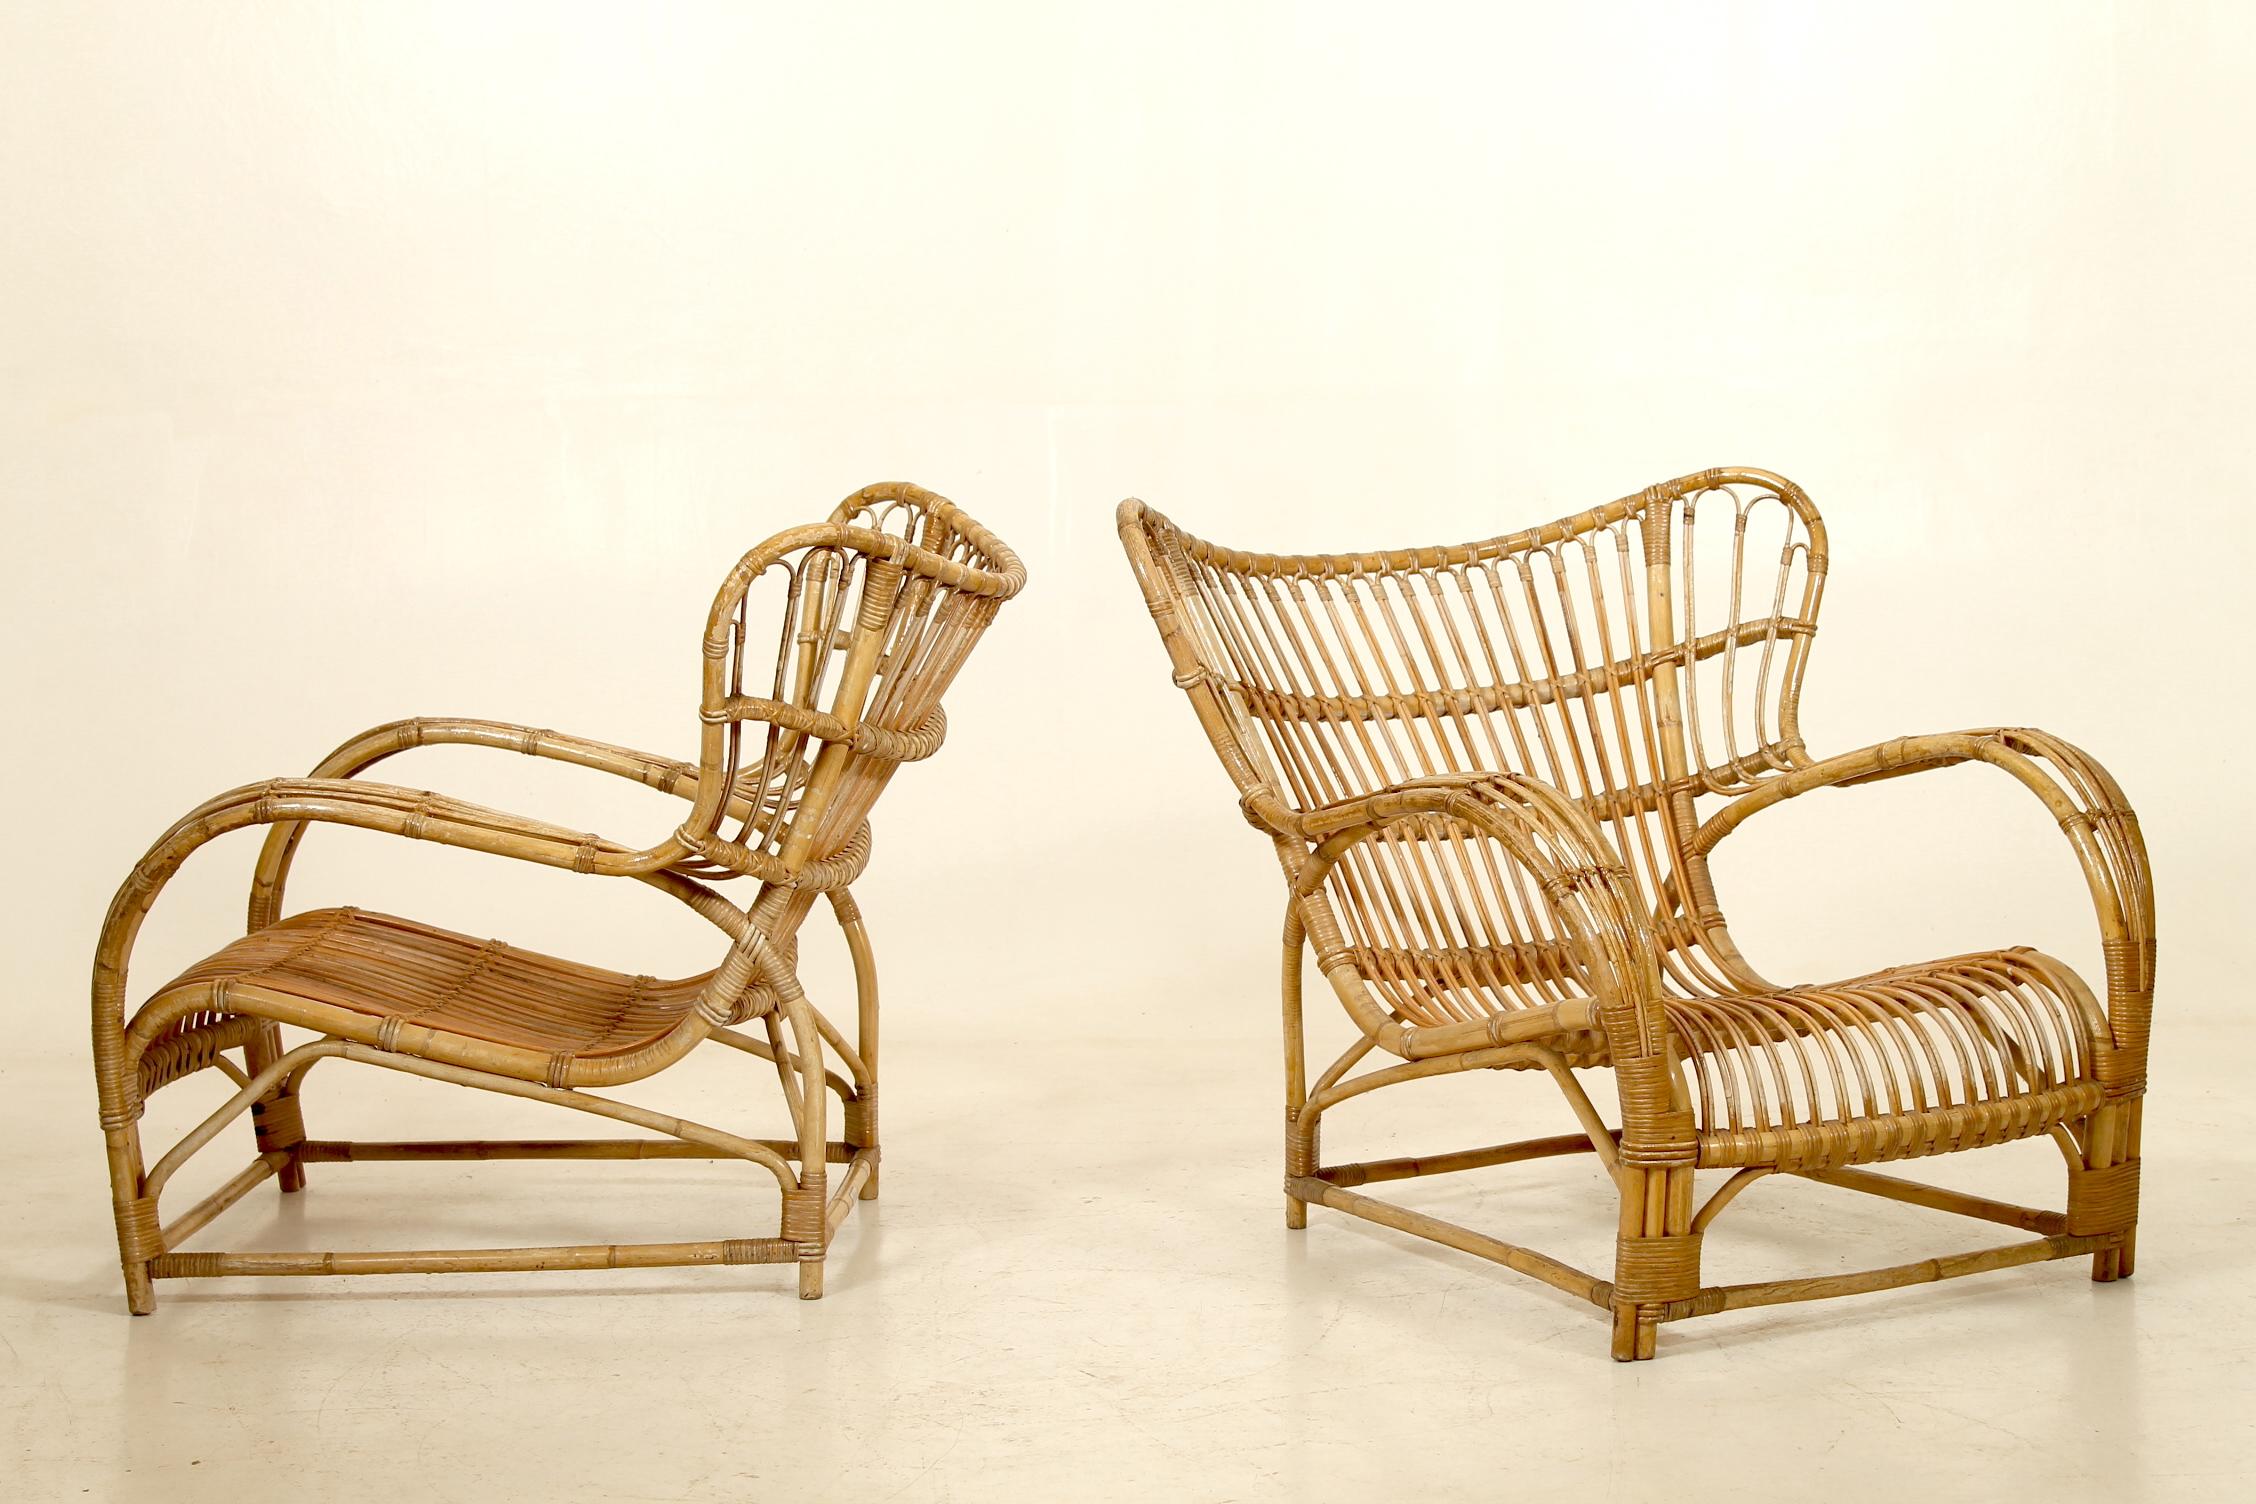 A rare pair including one stool of model VB 136 lounge chairs by Viggo Boesen for E.V.A. Nissen & Co, Denmark. This bamboo chair was designed in 1936 and still has the Nissen tags on them. Stool measures 50x35x48 cm.